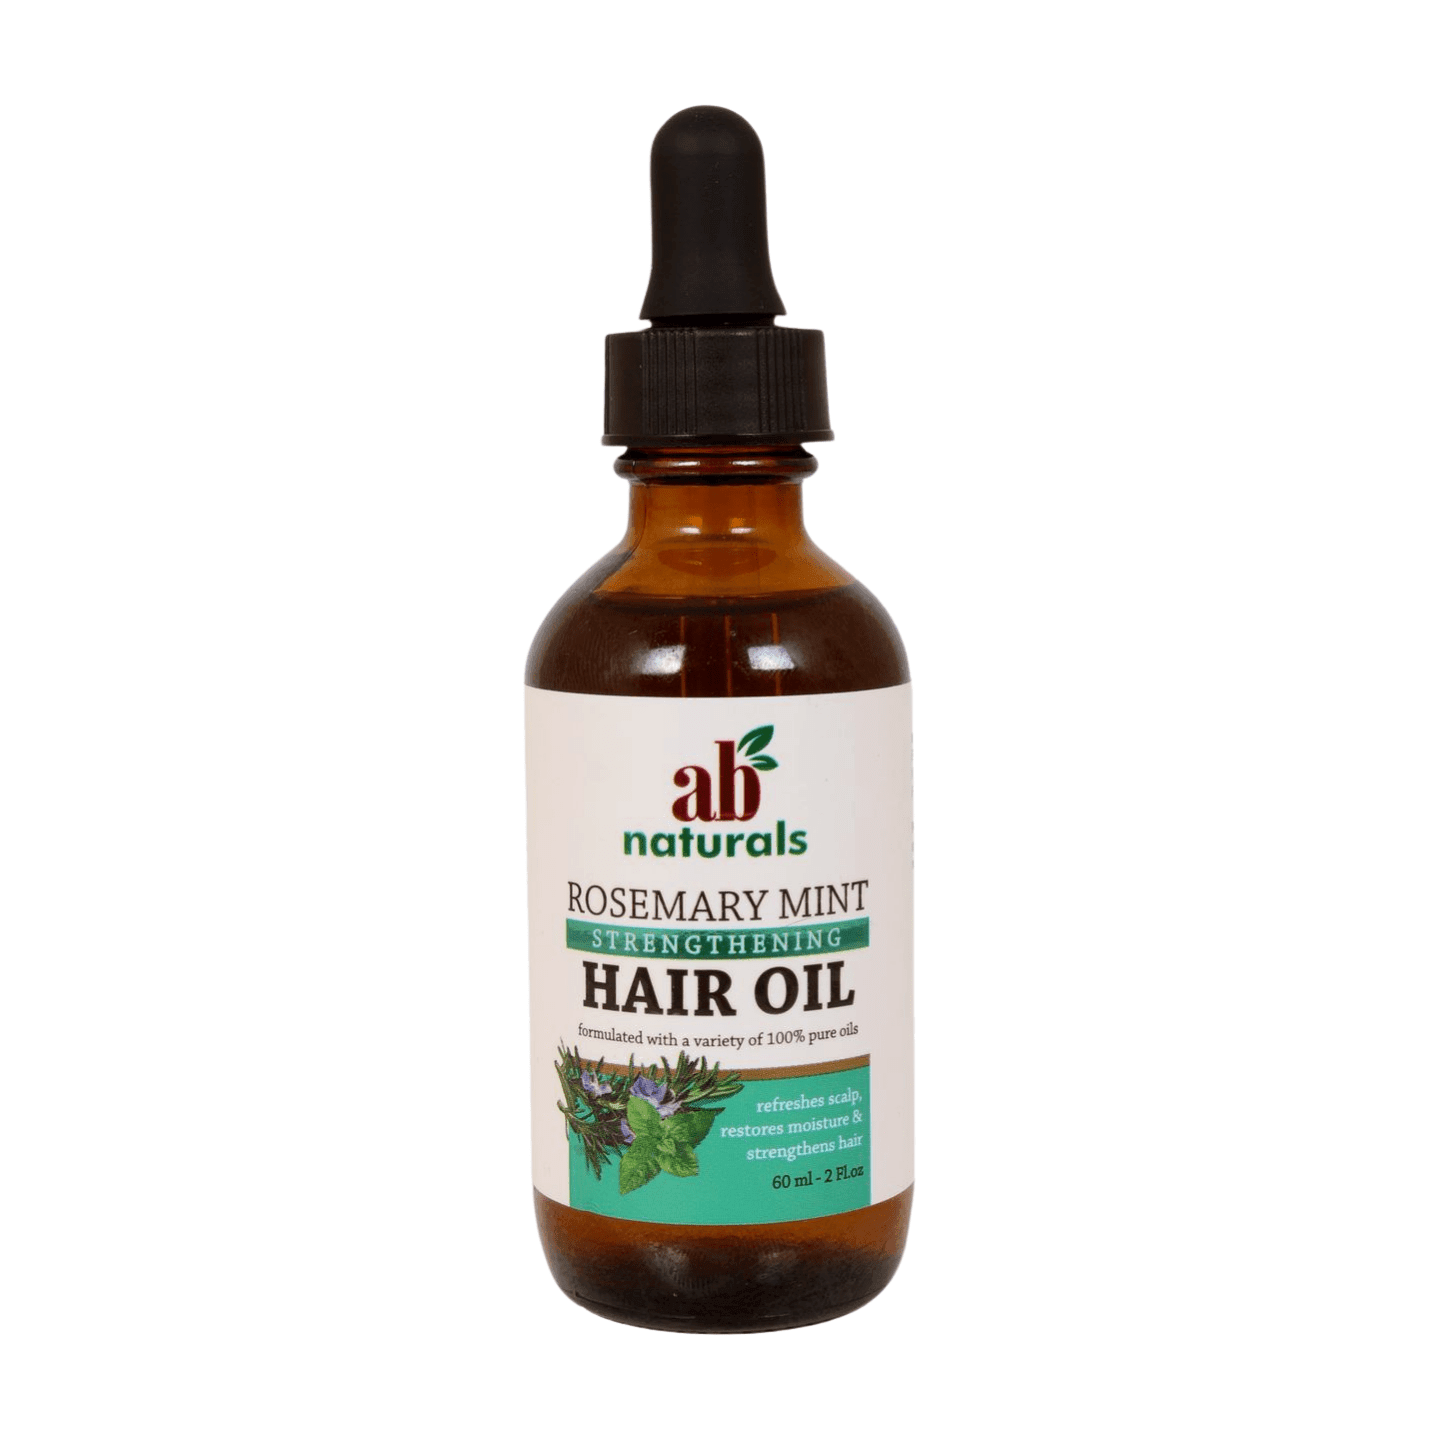 Ab Naturals Rosemary Mint Hair Oil 2 fl.oz (60ml) - African Beauty Online